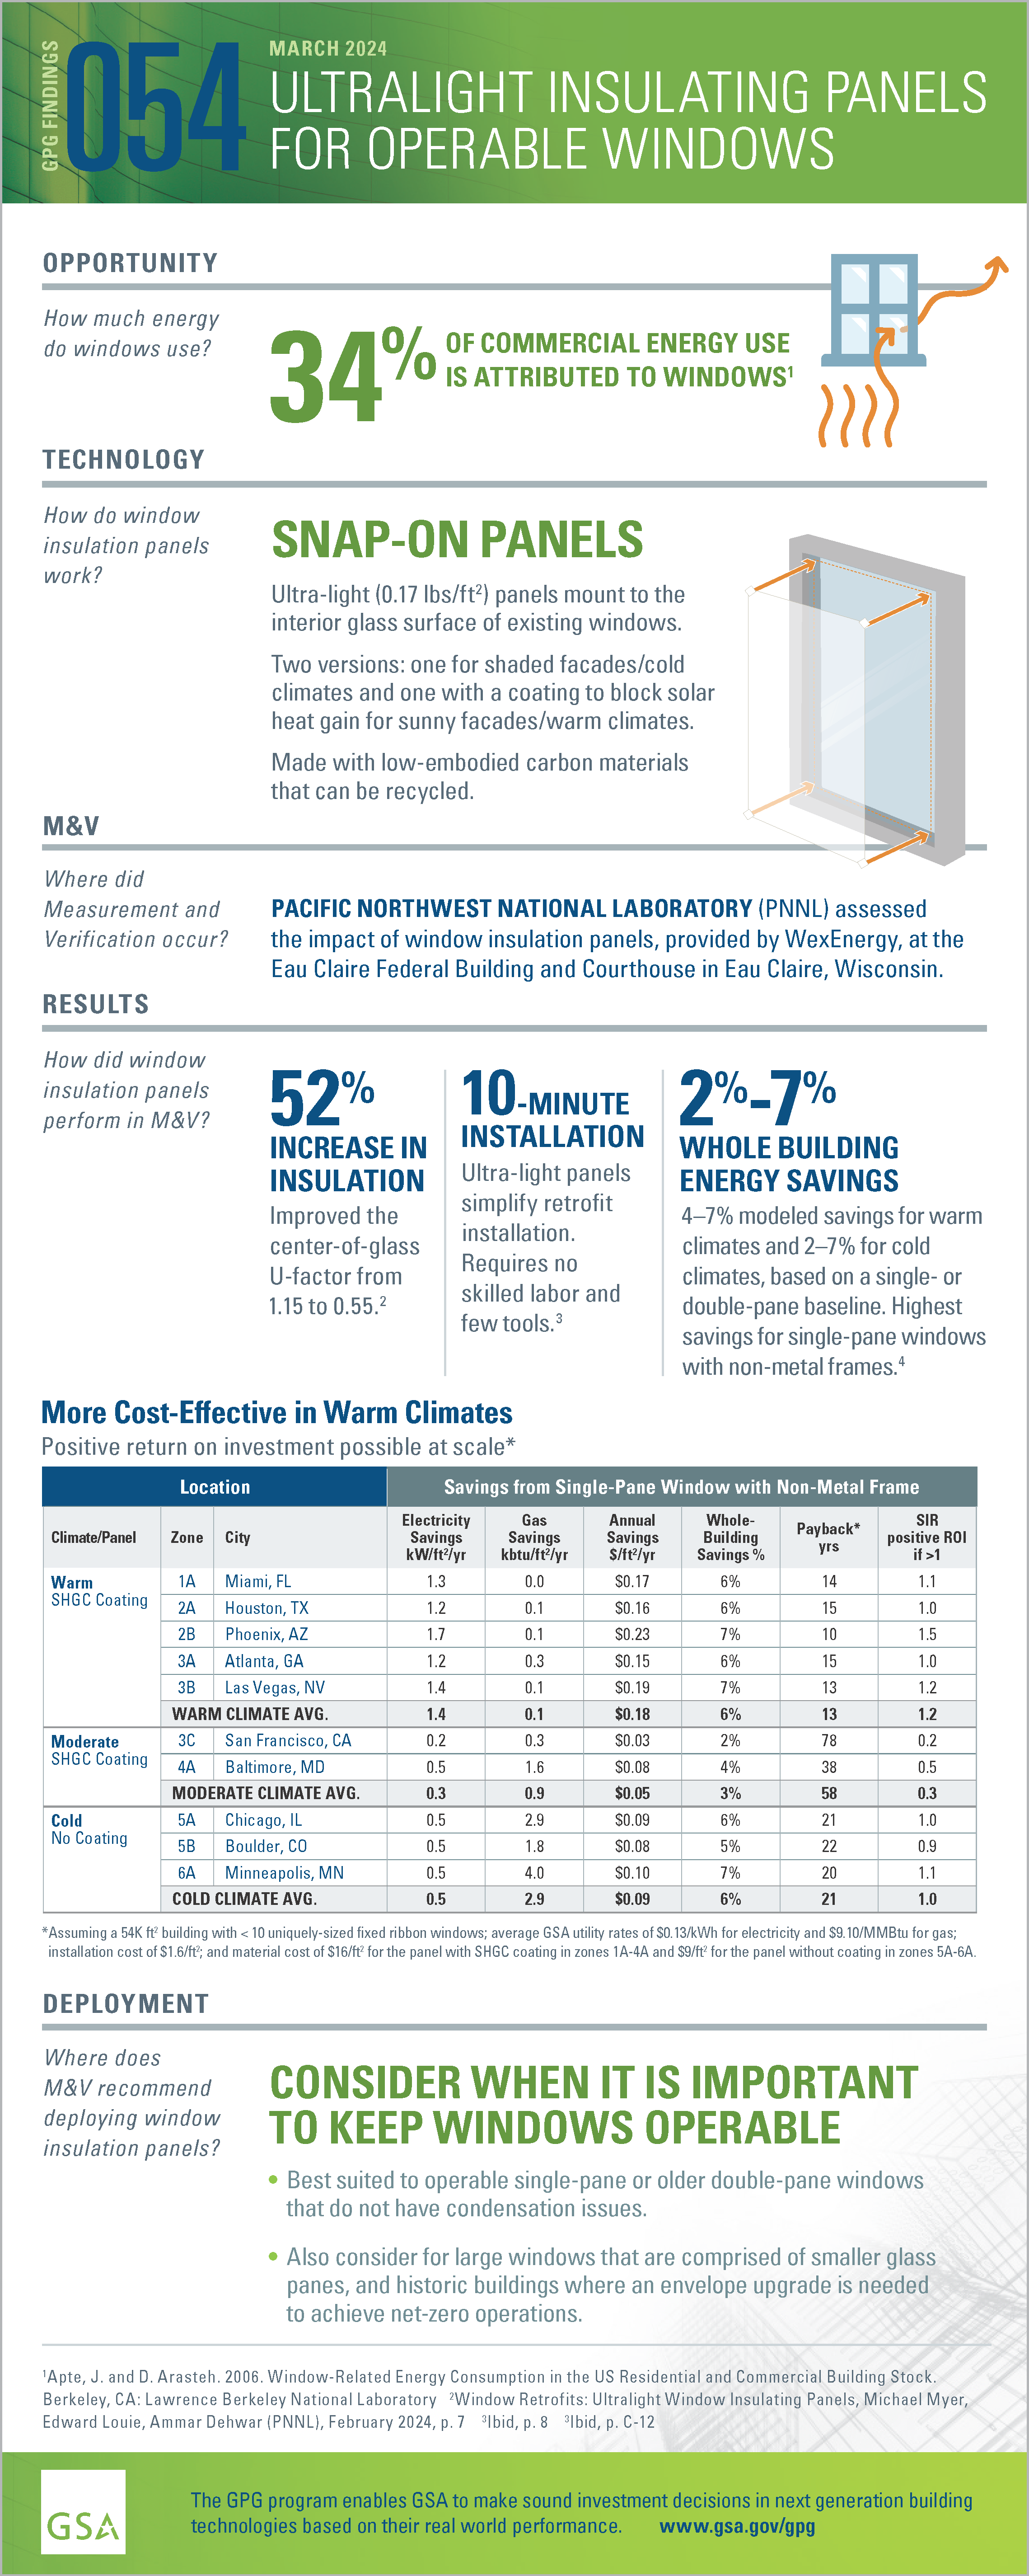 GPG 054 Ultralight Insulating Panels for Operable Windows - Infographic